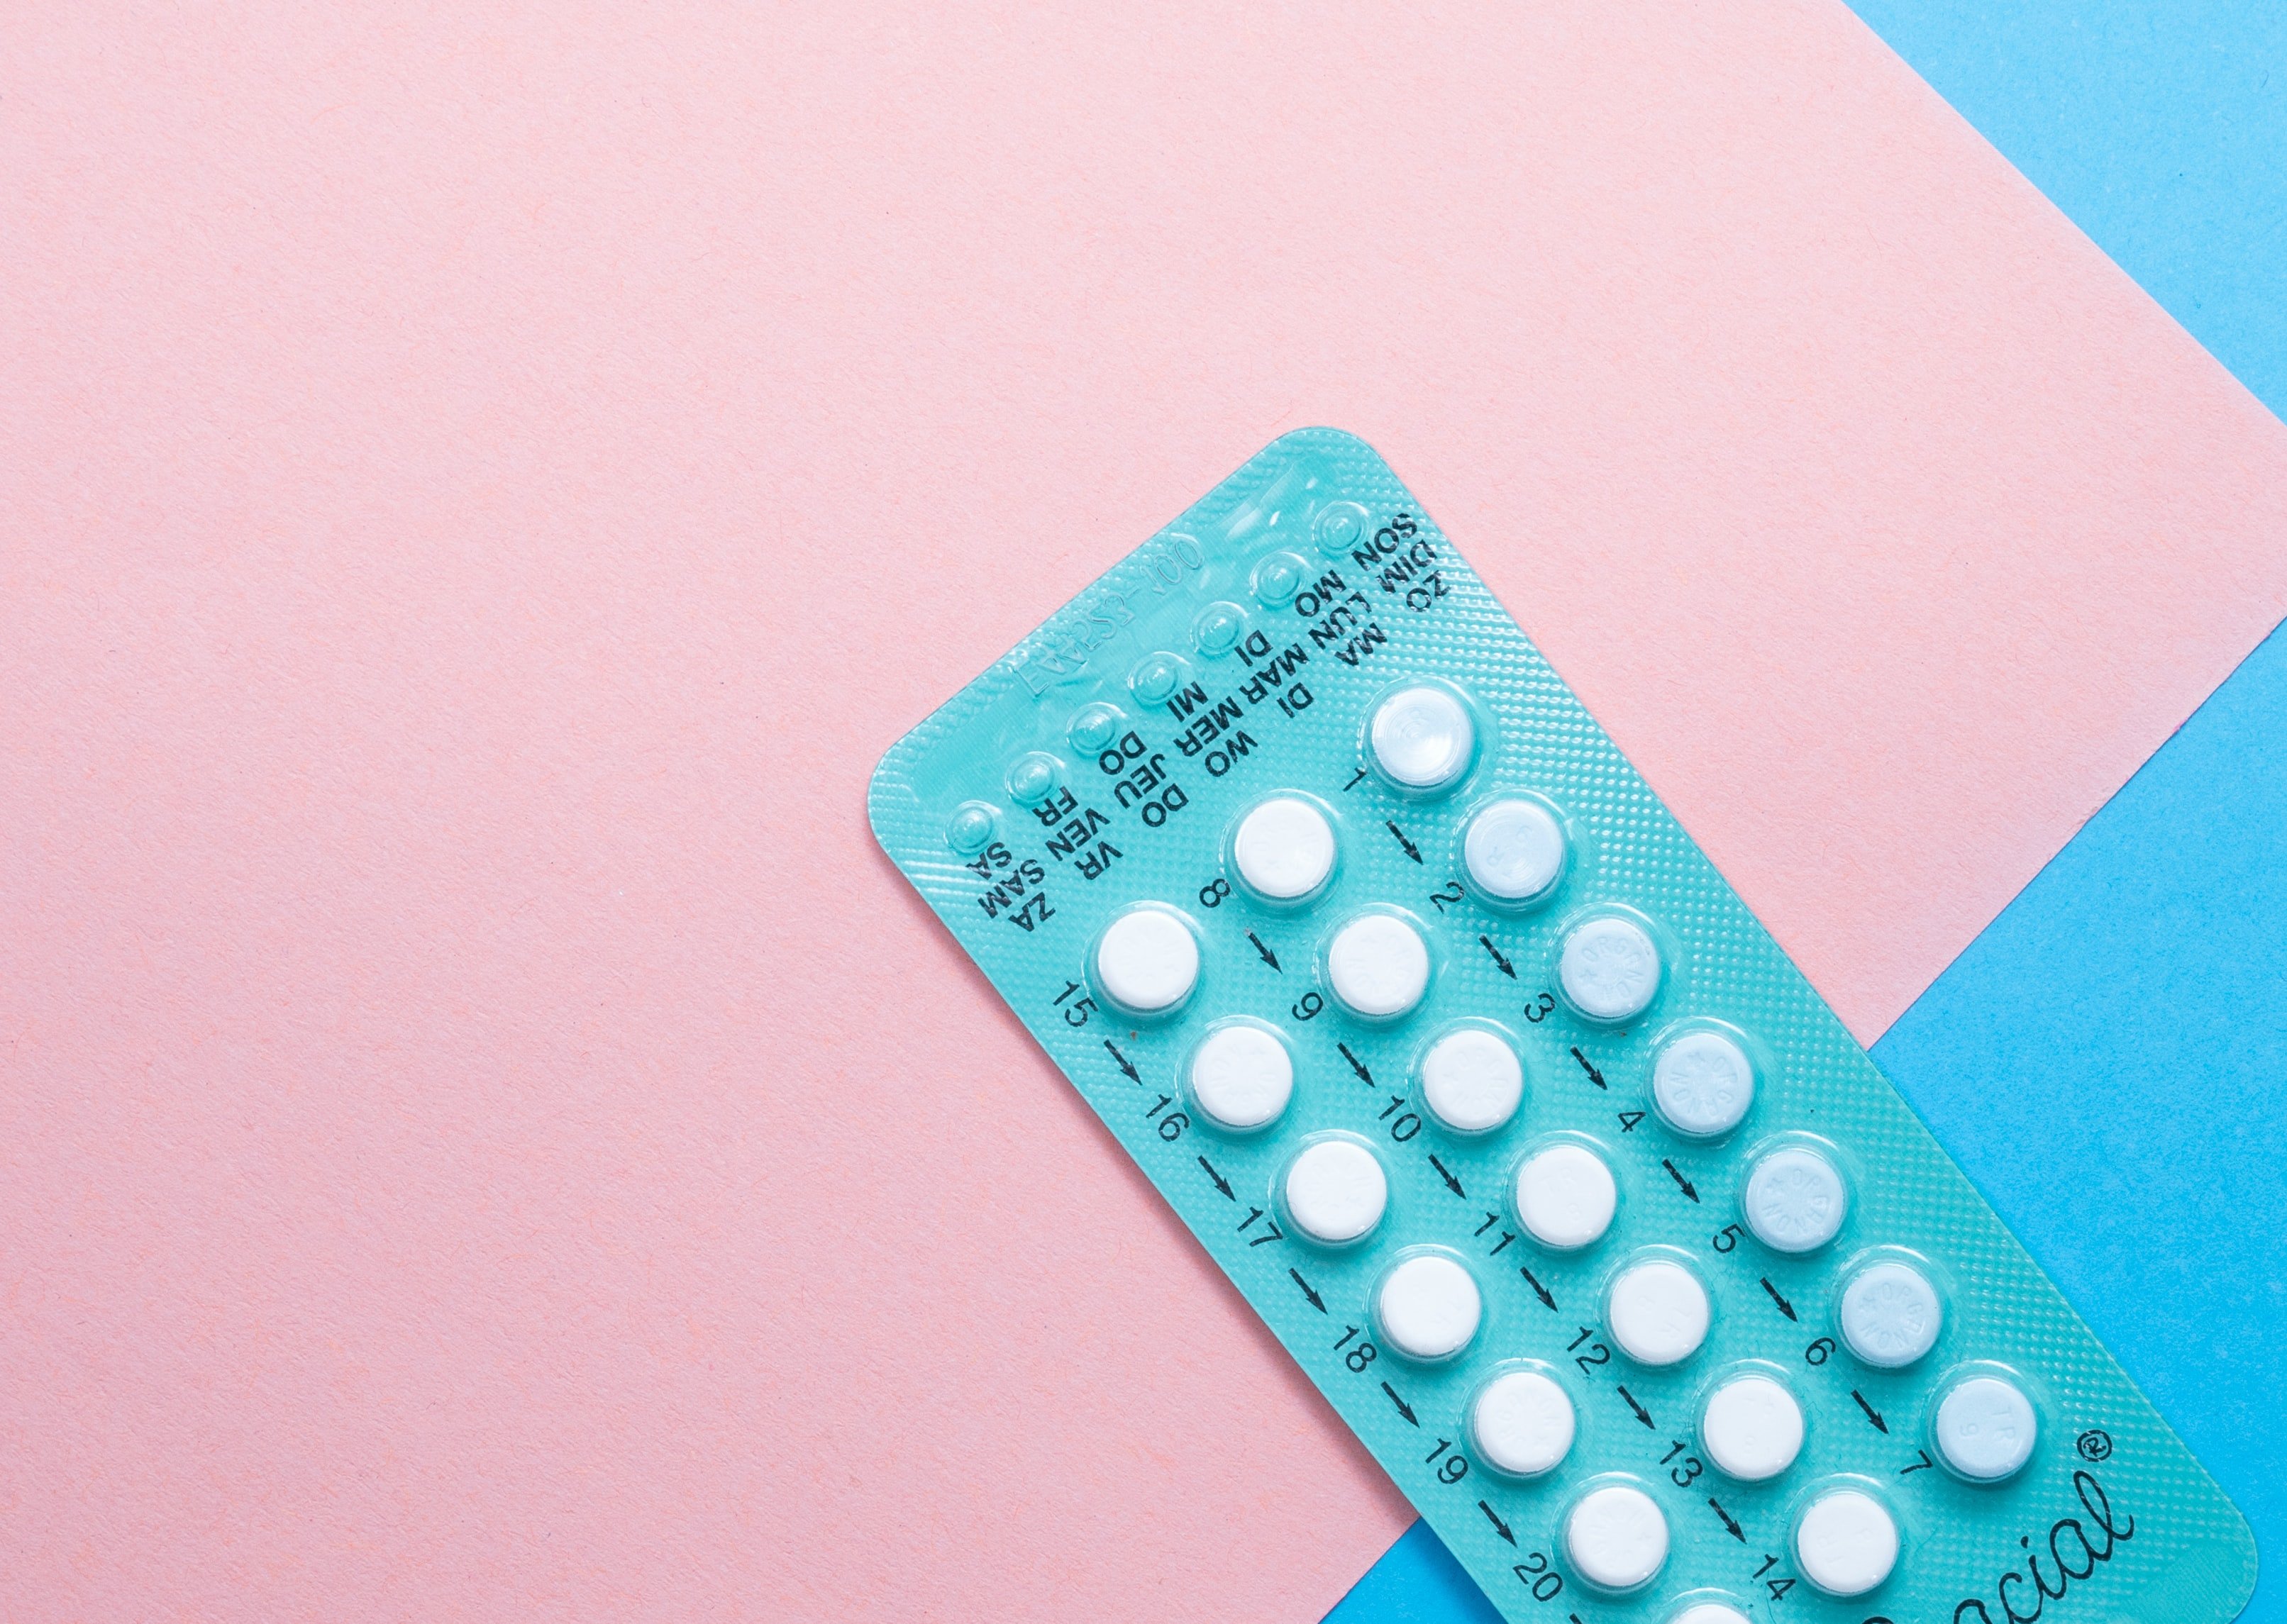 Rose had forgotten the pills she was meant to take everyday | Source: Pexels